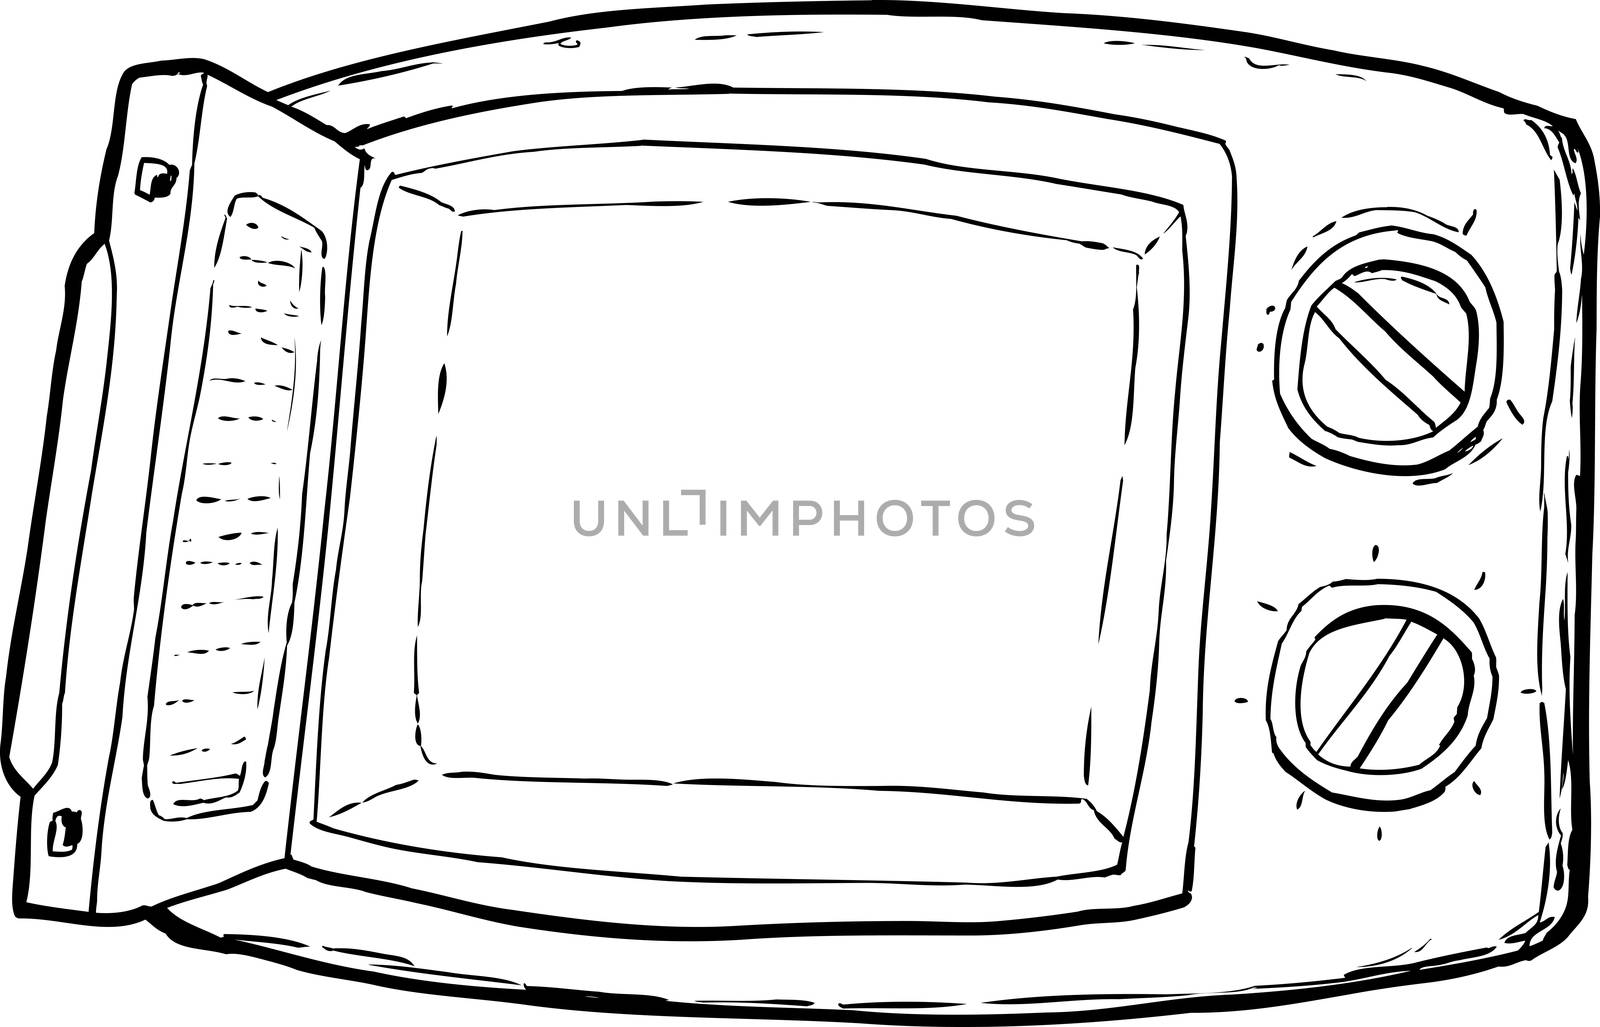 Outlined Open Microwave Oven Cartoon by TheBlackRhino